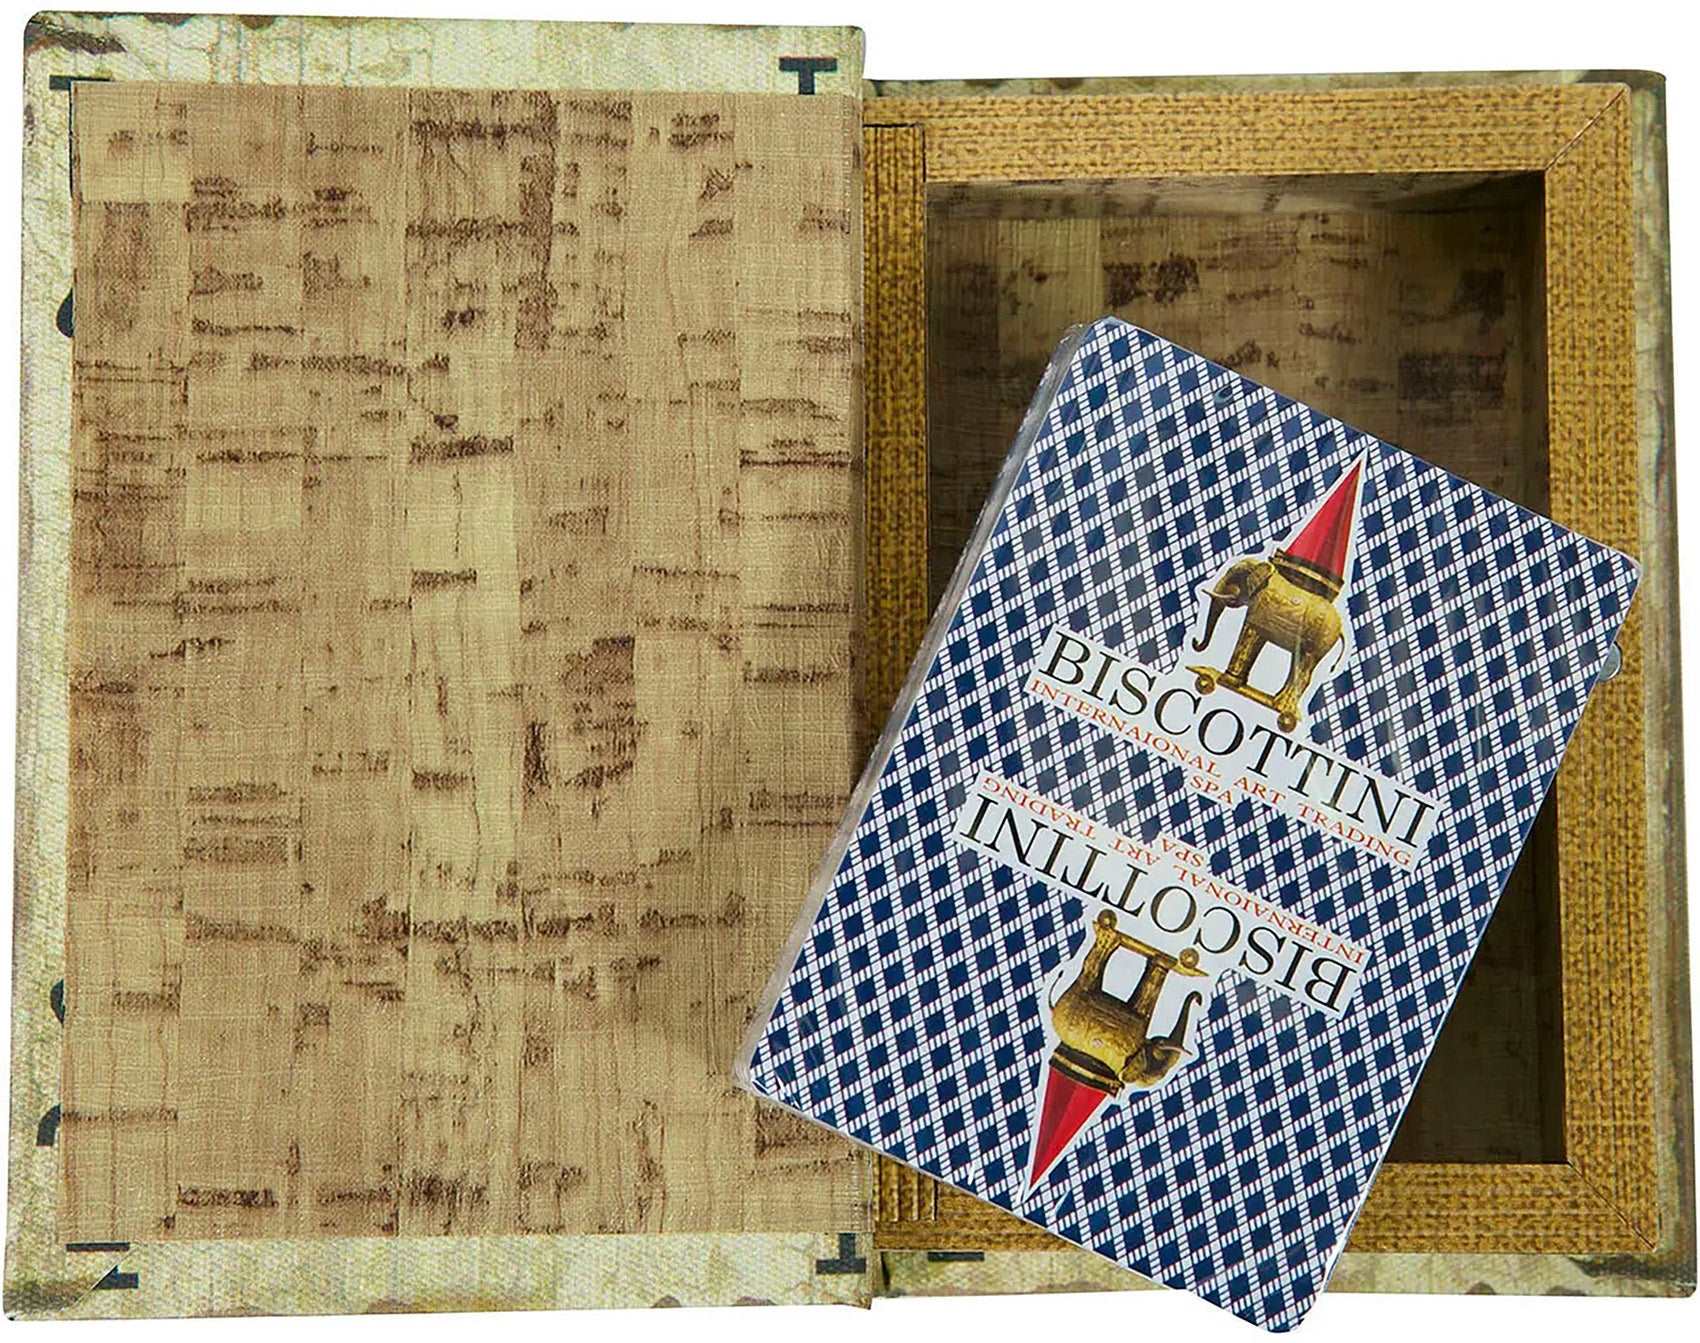 *Deck of cards included*  Durable and practical 10x3x14 cm box and playing cards from Biscottini. Such a nice way to keep your cards neat and tidy and ready for playing.   Made in Italy